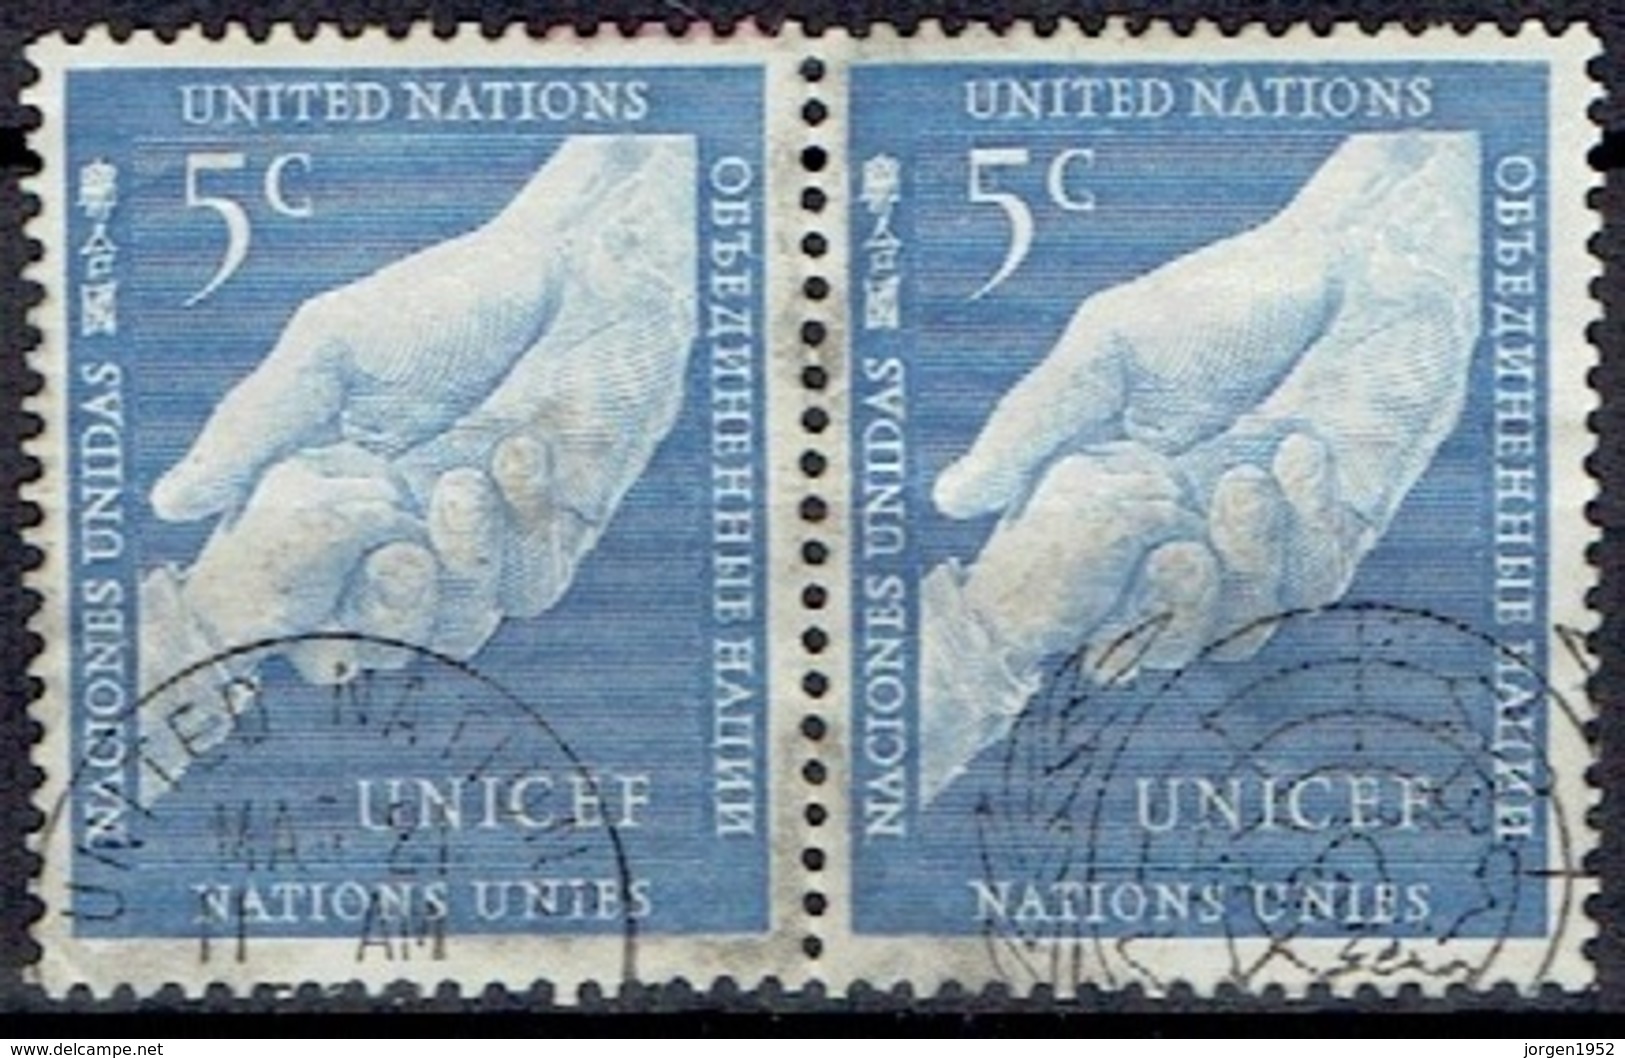 UNITED NATIONS # NEW YORK FROM 1951 STAMPWORLD 5 - Used Stamps